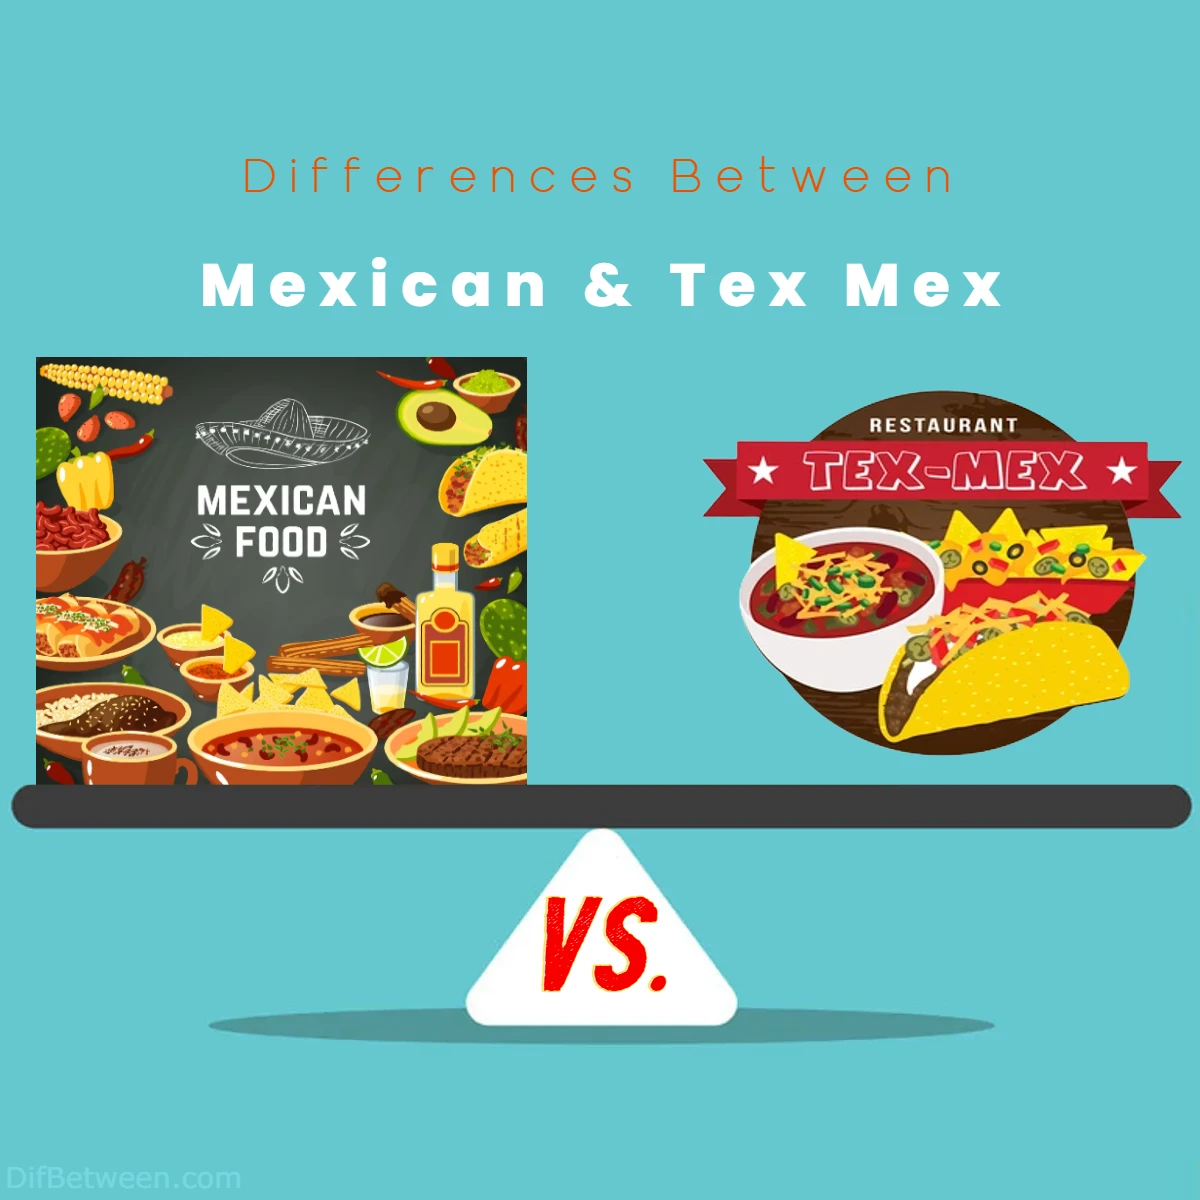 Differences Between Mexican vs Tex Mex